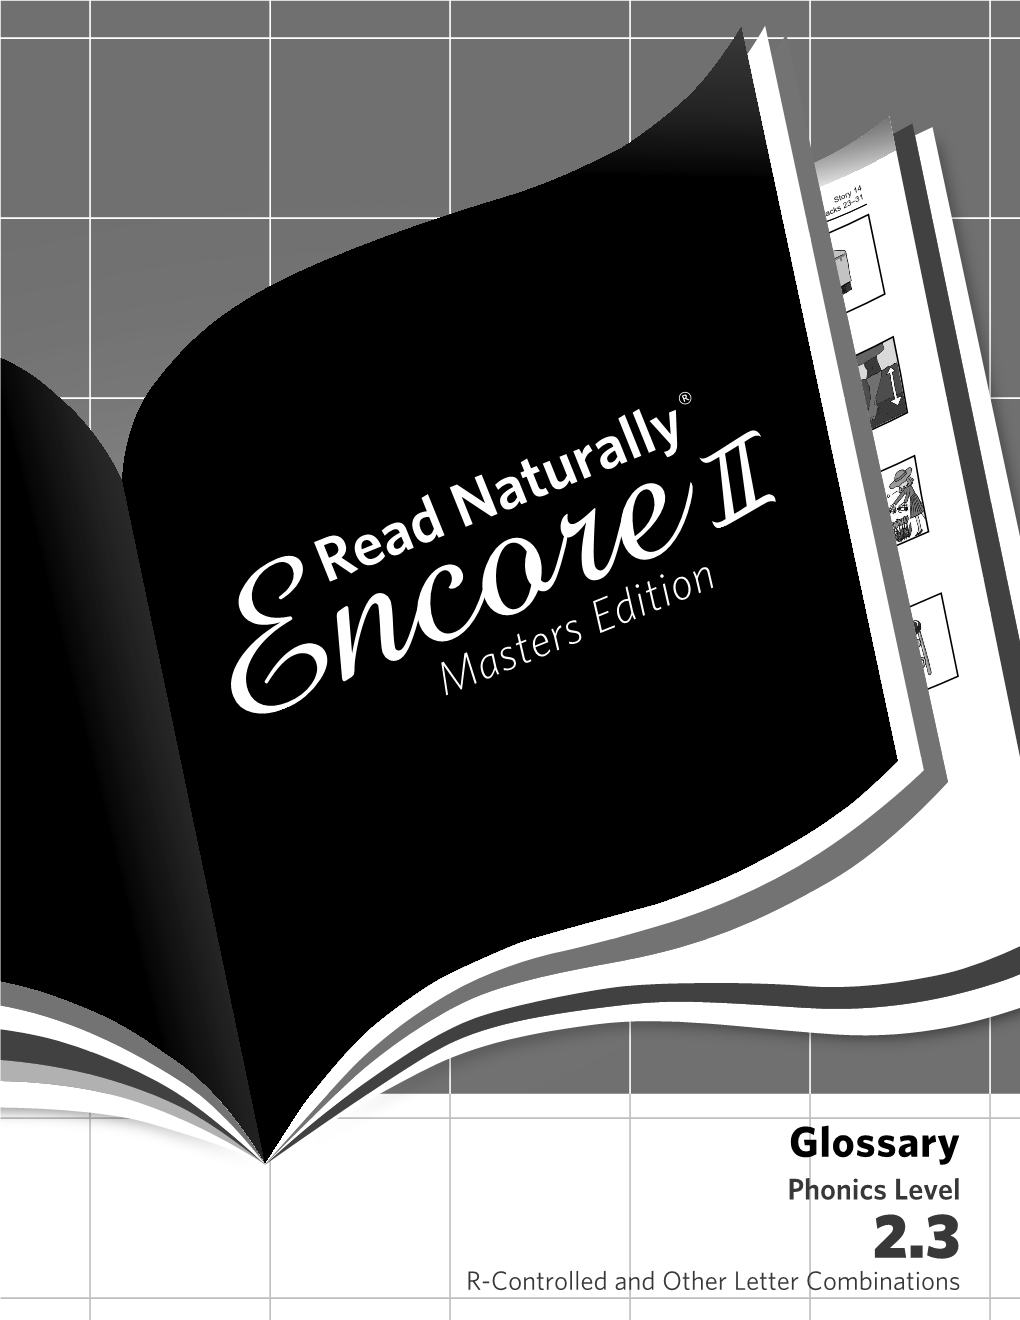 Read Naturally Encore II Glossary—Level 2.3 Table of Contents